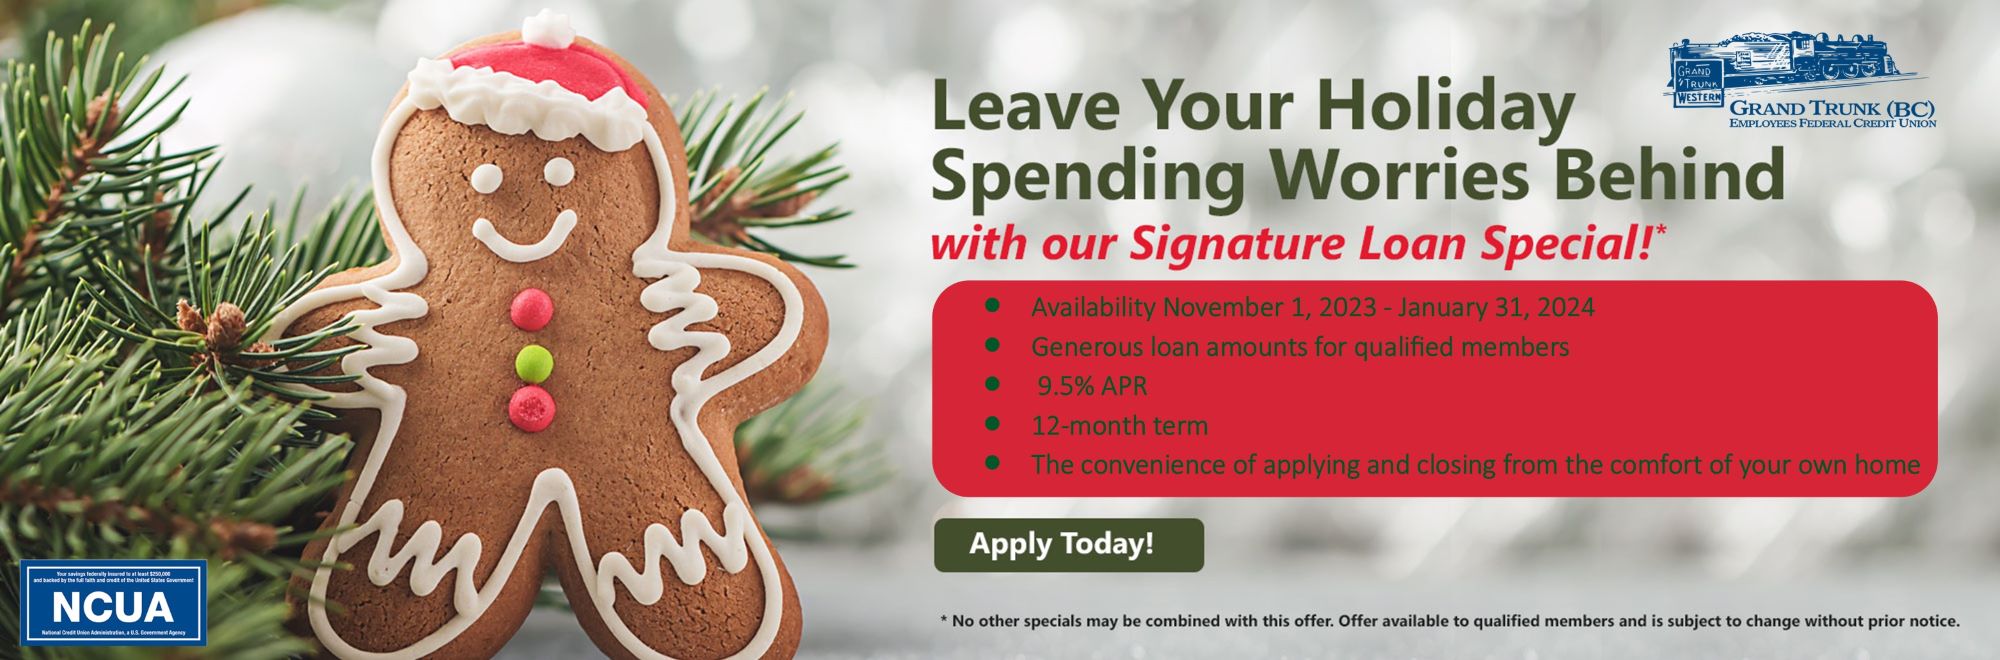 Leave Your spending worried behind with our signature loan special! Availability November 1, 2023 - January 31, 2024 Generous loan amounts for qualified members 9.5% APR 12-month term The convenience of applying and closing from the comfort of your own home Apply Today! No other specials may be combined with this offer. offer available to qualified members and is subject to change without prior notice. 